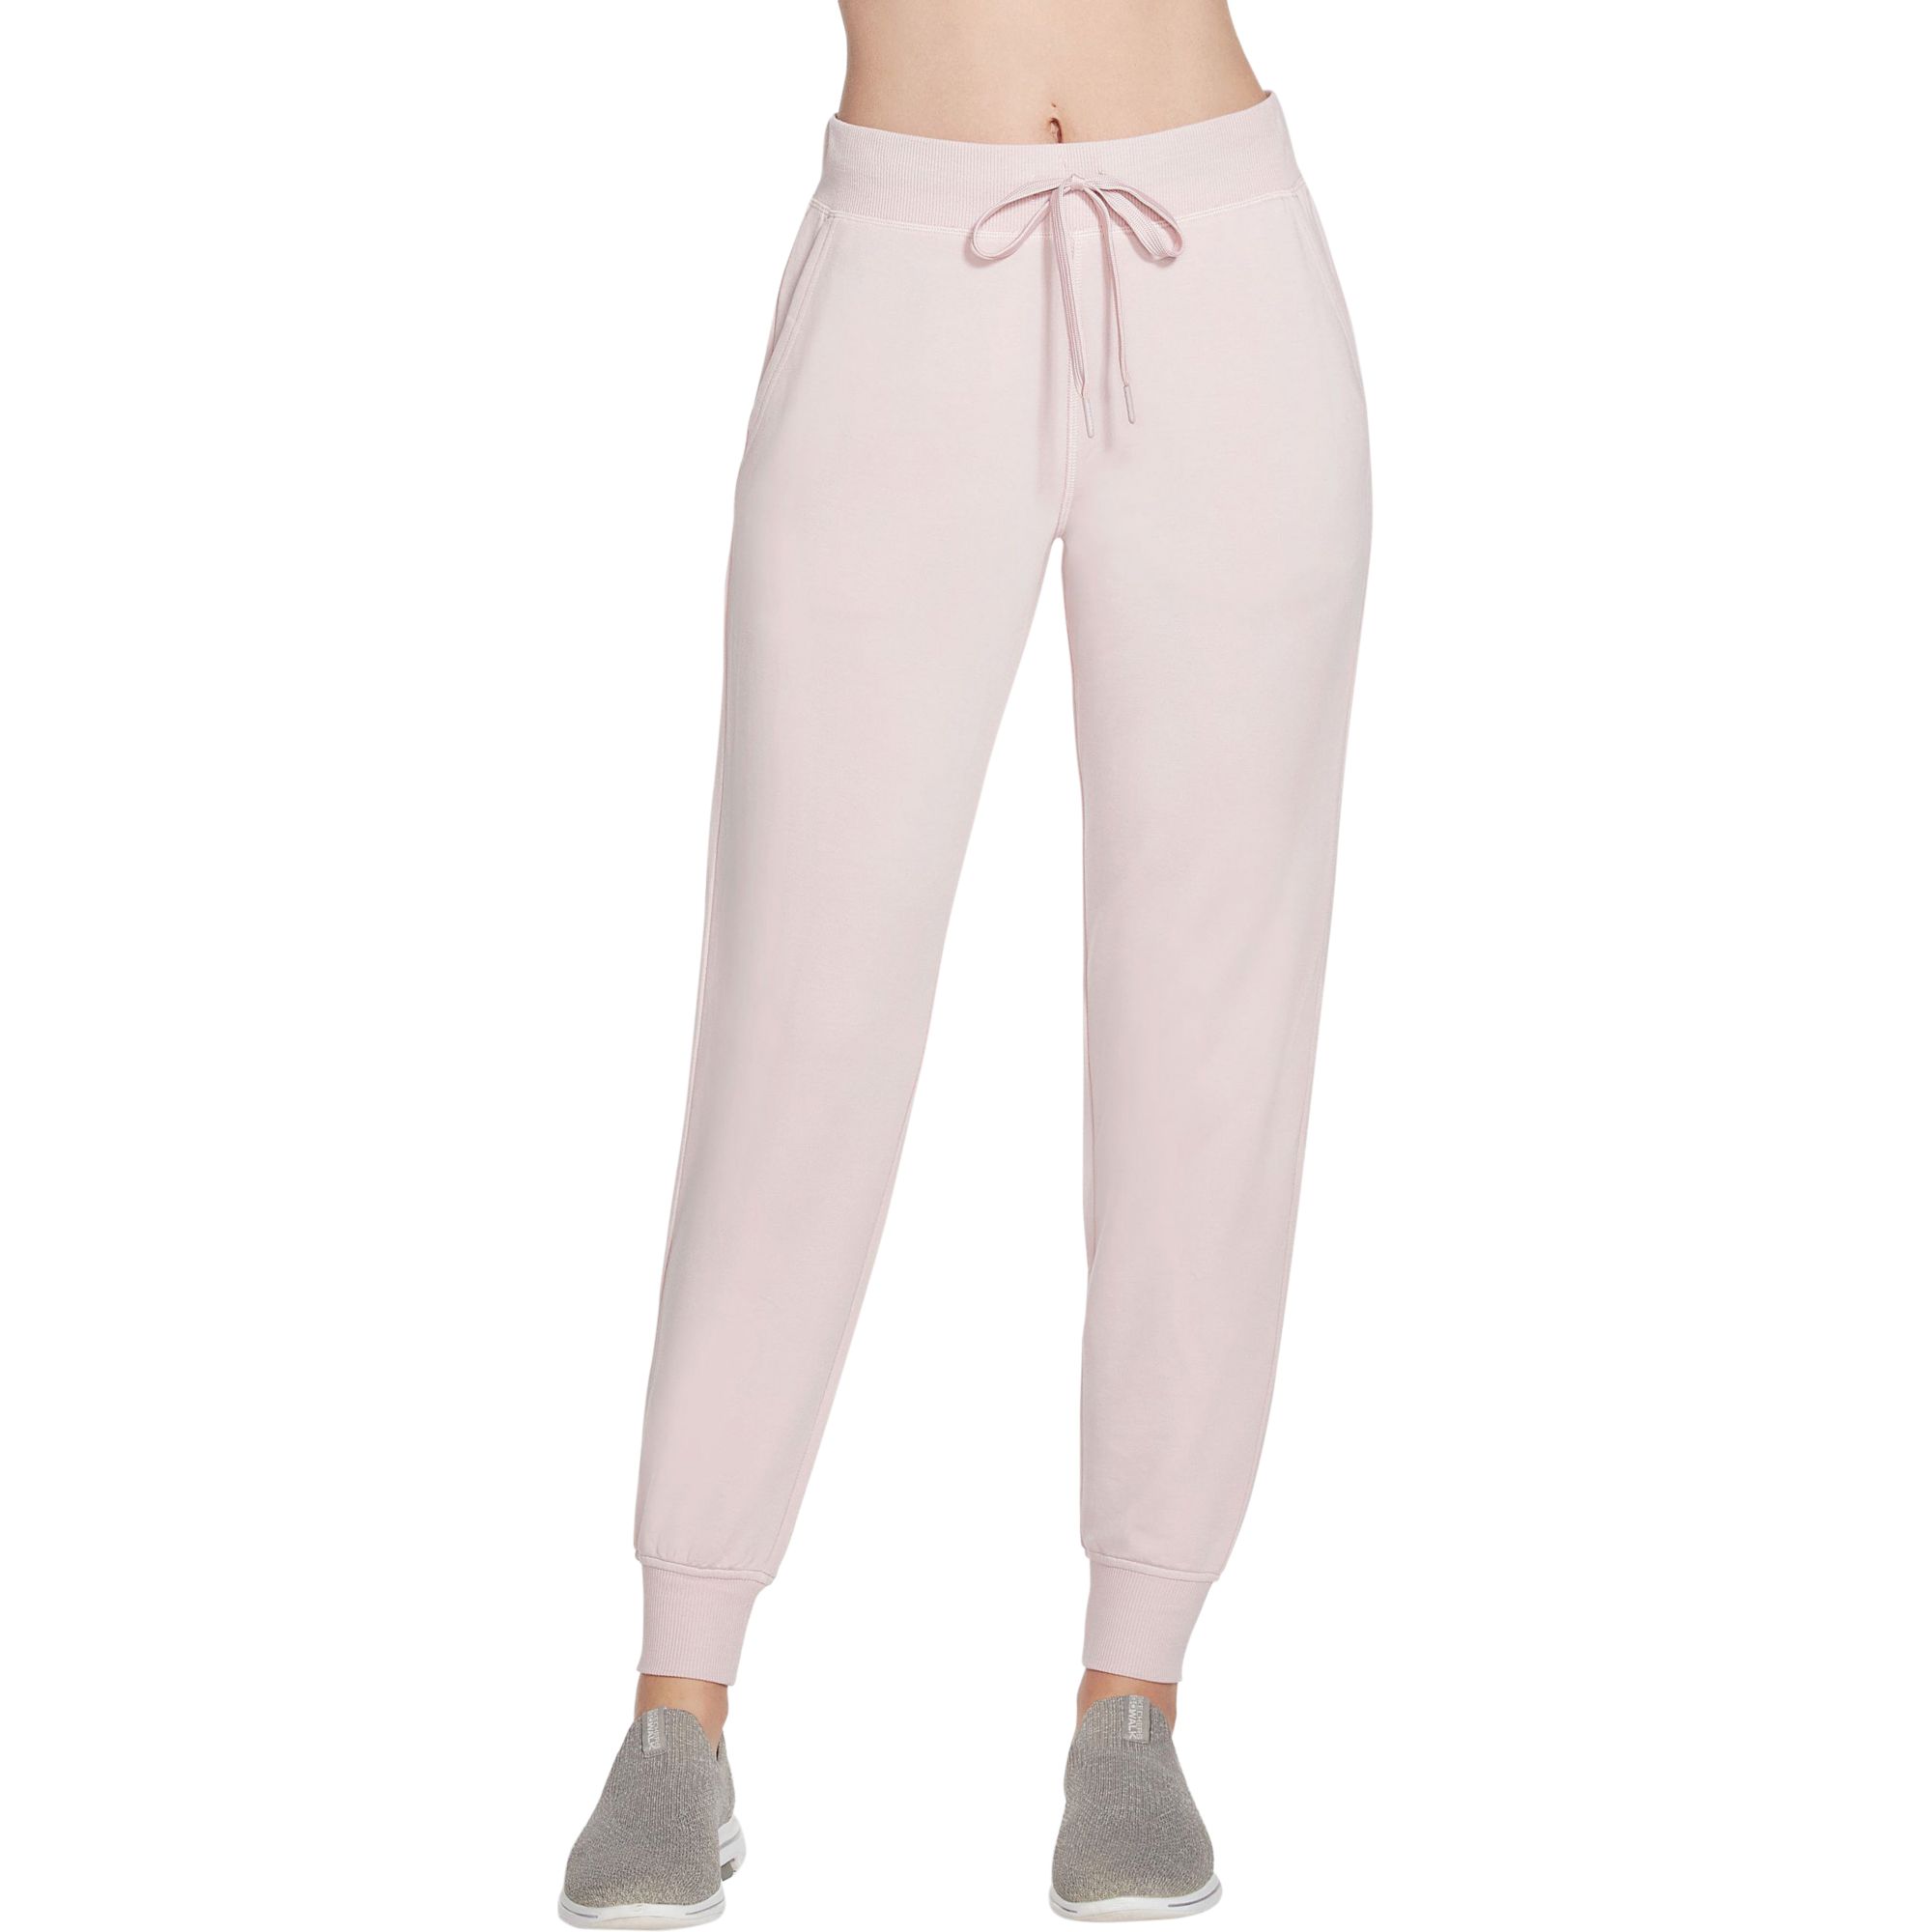 RESFUL JOGGER PANT hervis.ro